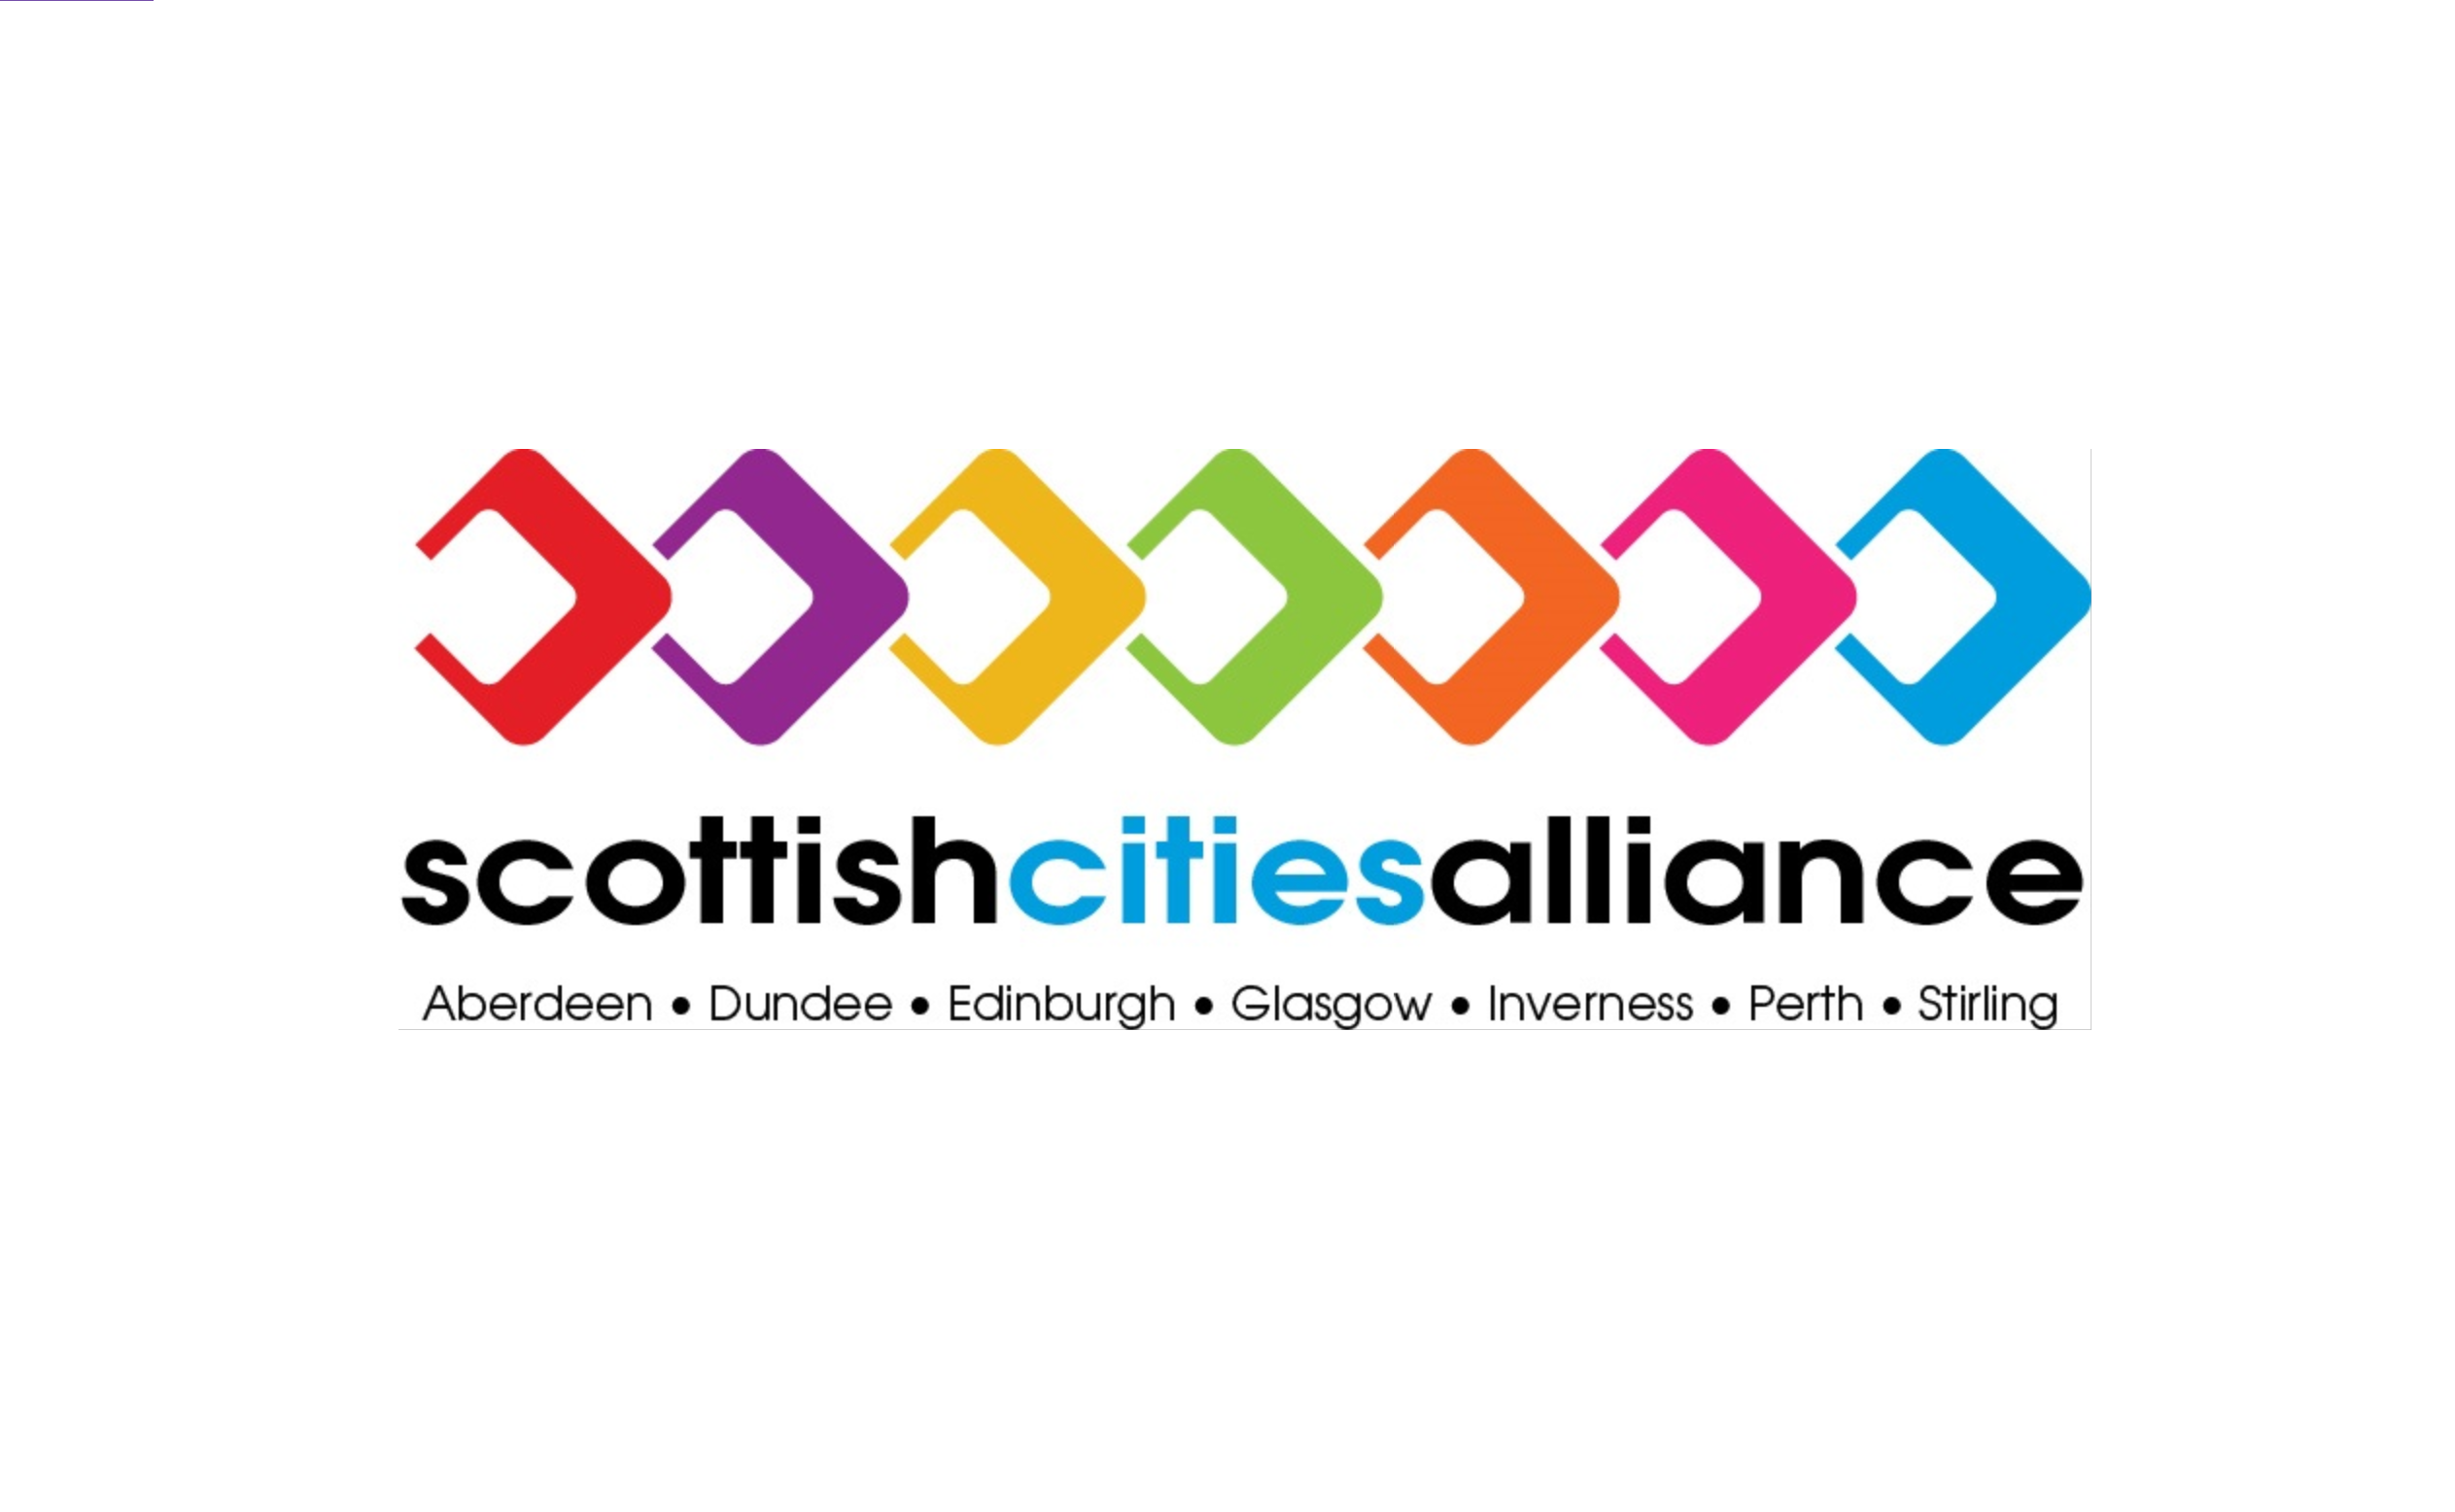 Scottish Cities Alliance Logo featuring all 7 cities - Aberdeen, Dundee, Edinburgh, Glasgow, Inverness, Perth and Stirling